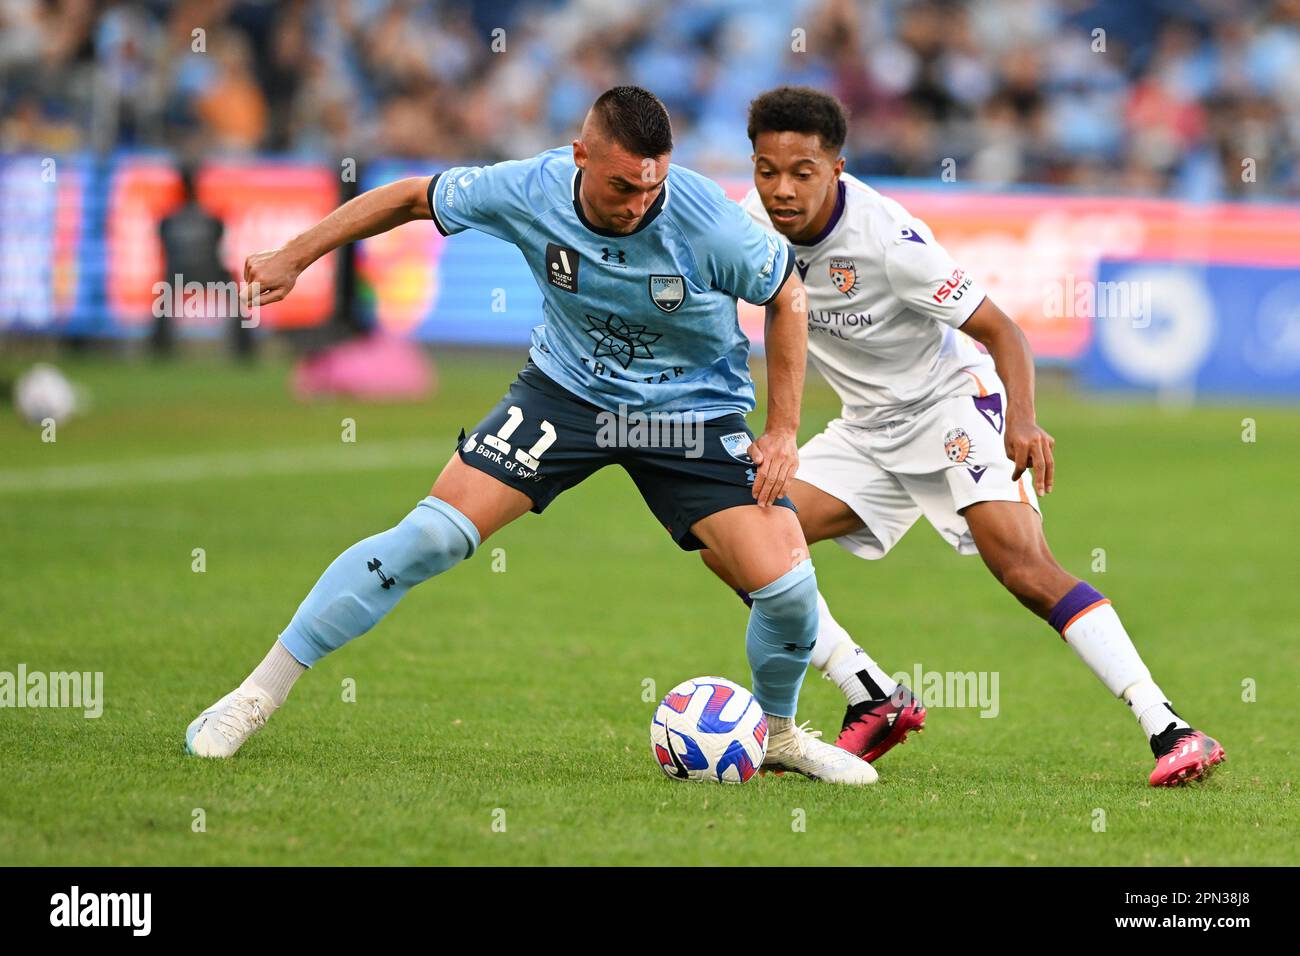 Sydney, Australia. 16th Apr, 2023. Robert Mak (L) of Sydney Football Club team and Antonee Alan Burke-Gilroy (R) of Perth Glory team in action during the 2022-23 Liberty A-League Men's soccer semi-final match between Sydney FC and Western United held at the Allianz Stadium. final score; Sydney football club 3:1 Perth glory Credit: SOPA Images Limited/Alamy Live News Stock Photo